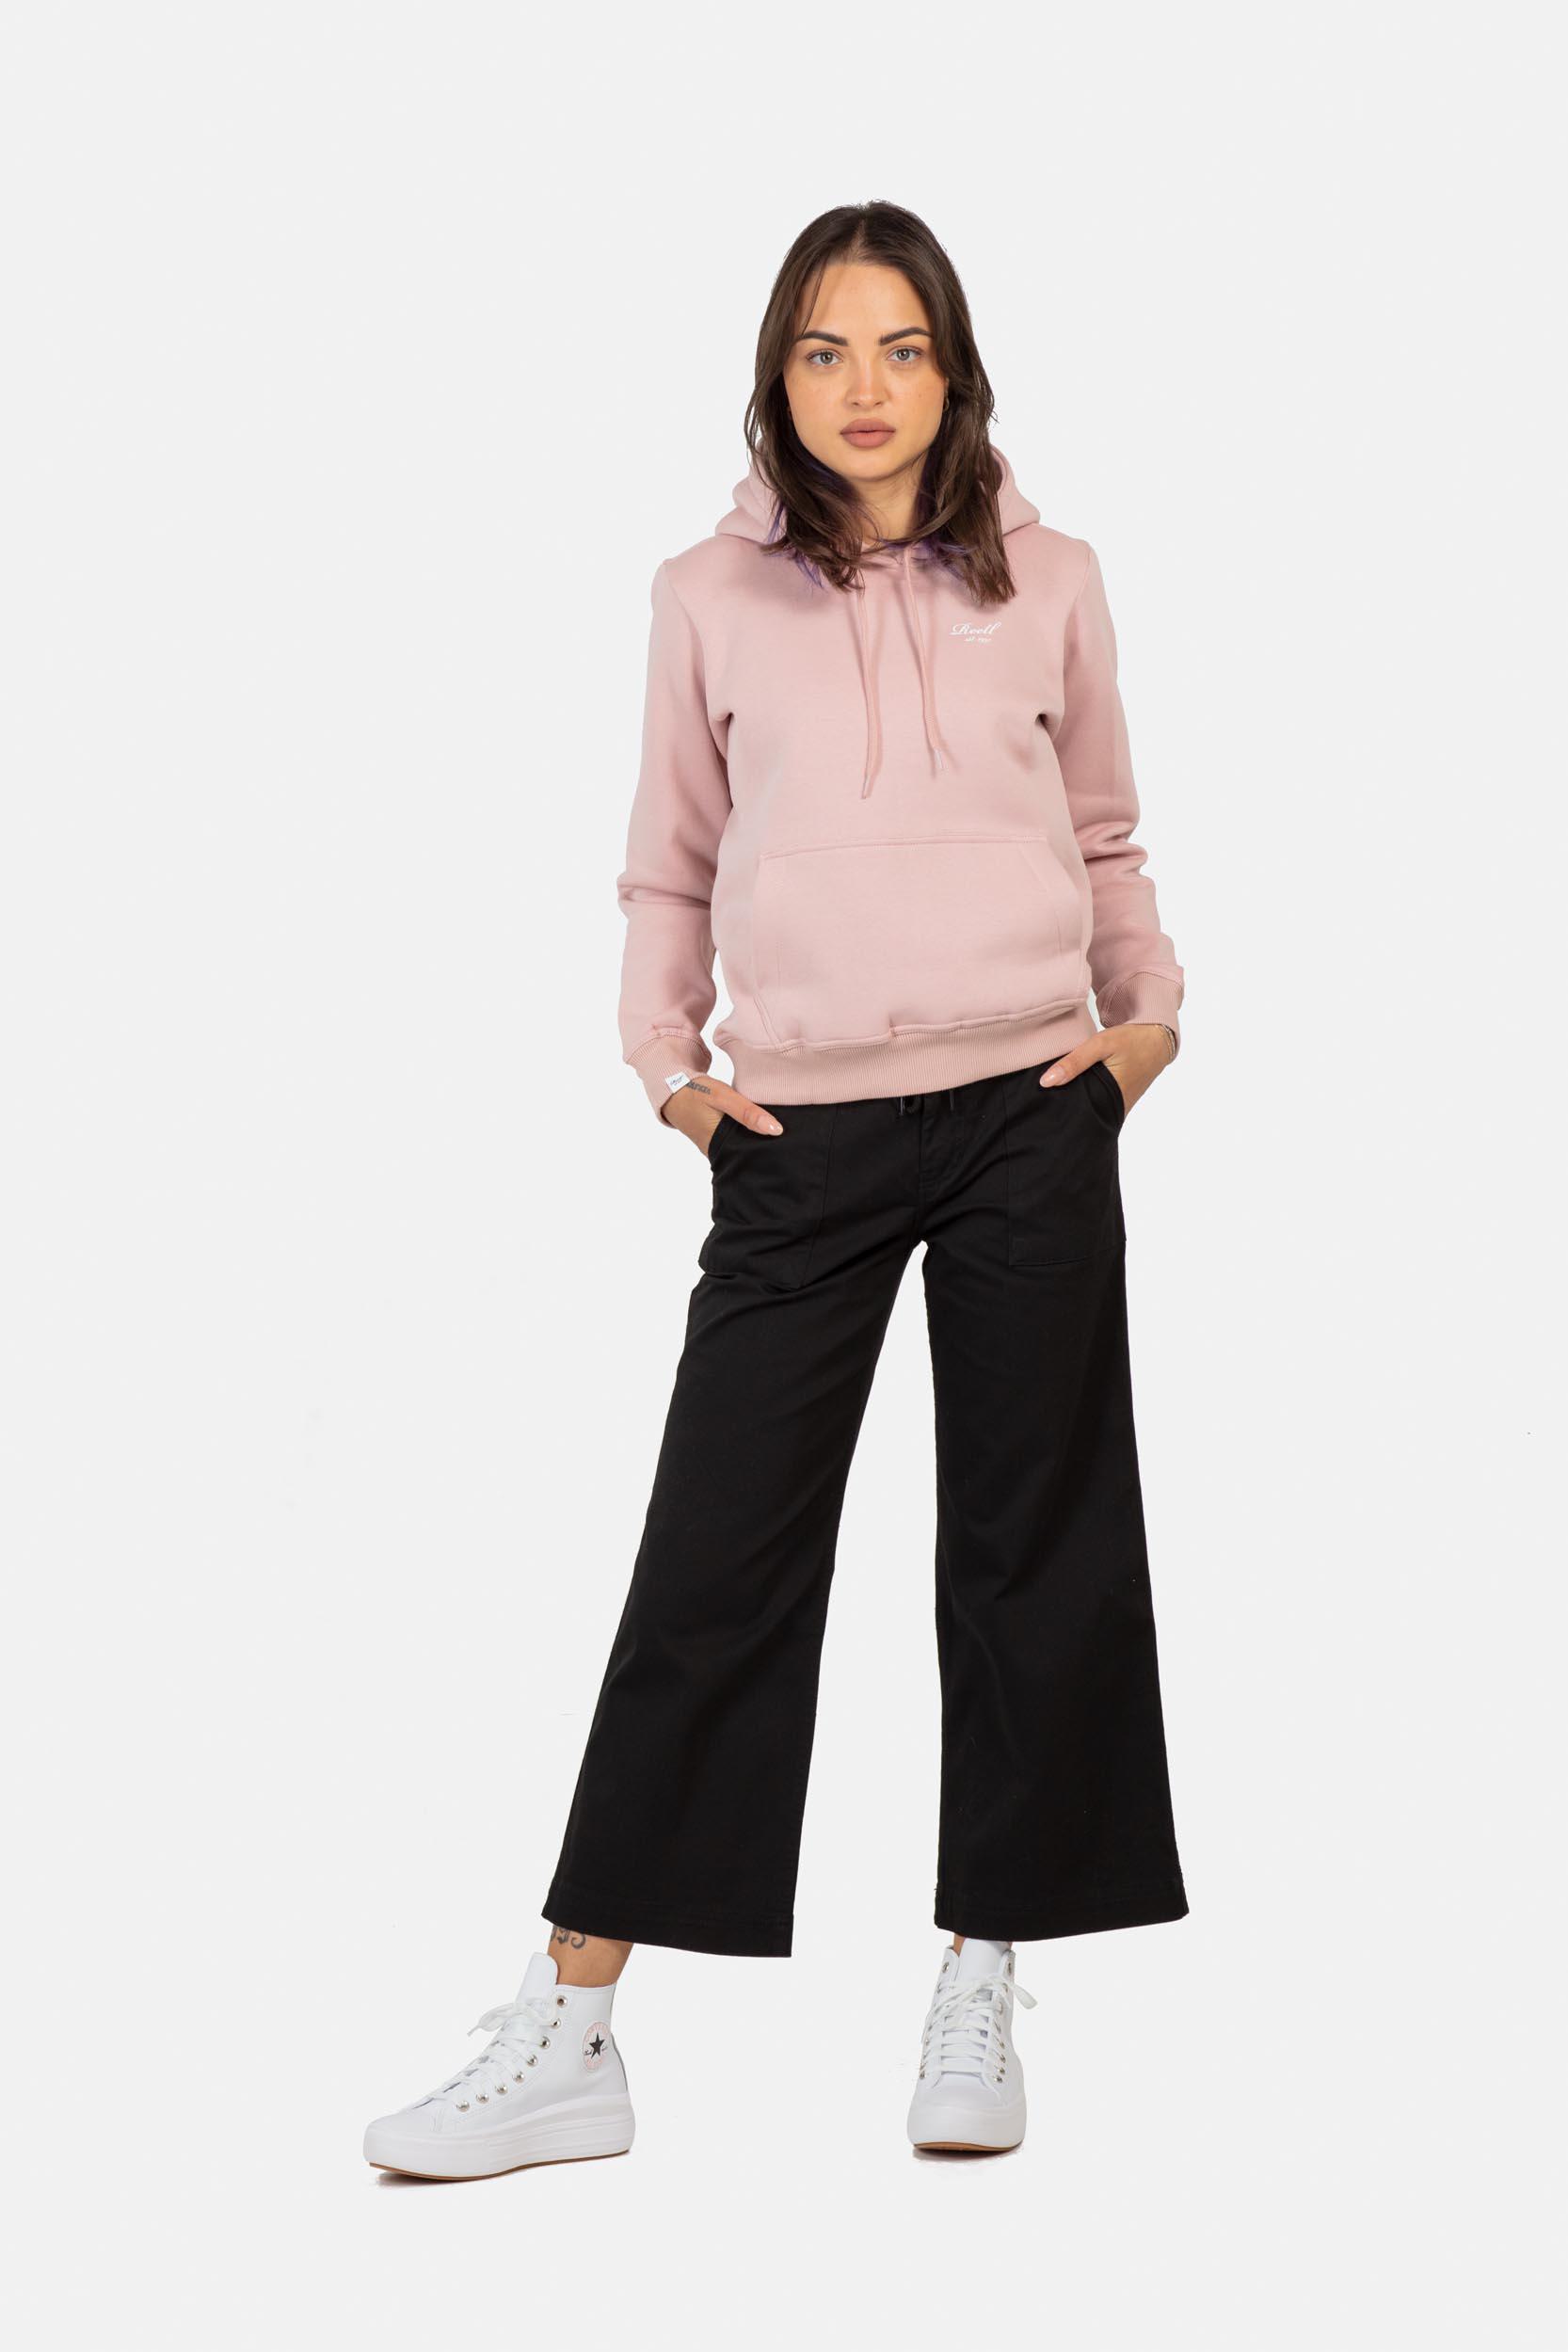 Reell Women Colette Pant (Farbe: Olive / Größe: 27)